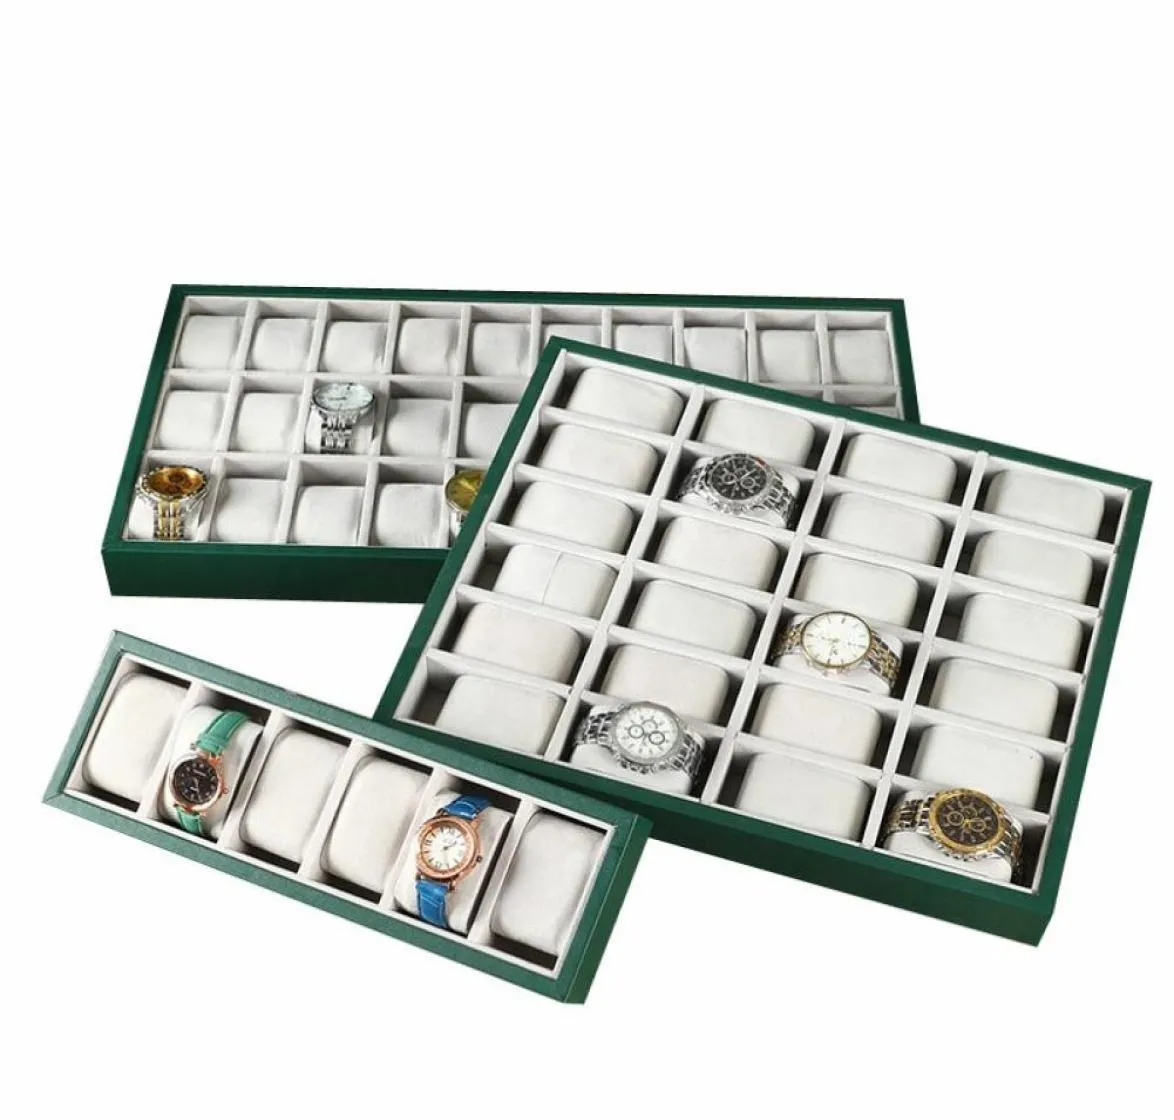 New Green PU Leather Watch Display Tray 6122430 Grid Watch Display Storage Props Watch Booth Display Shelf4436028